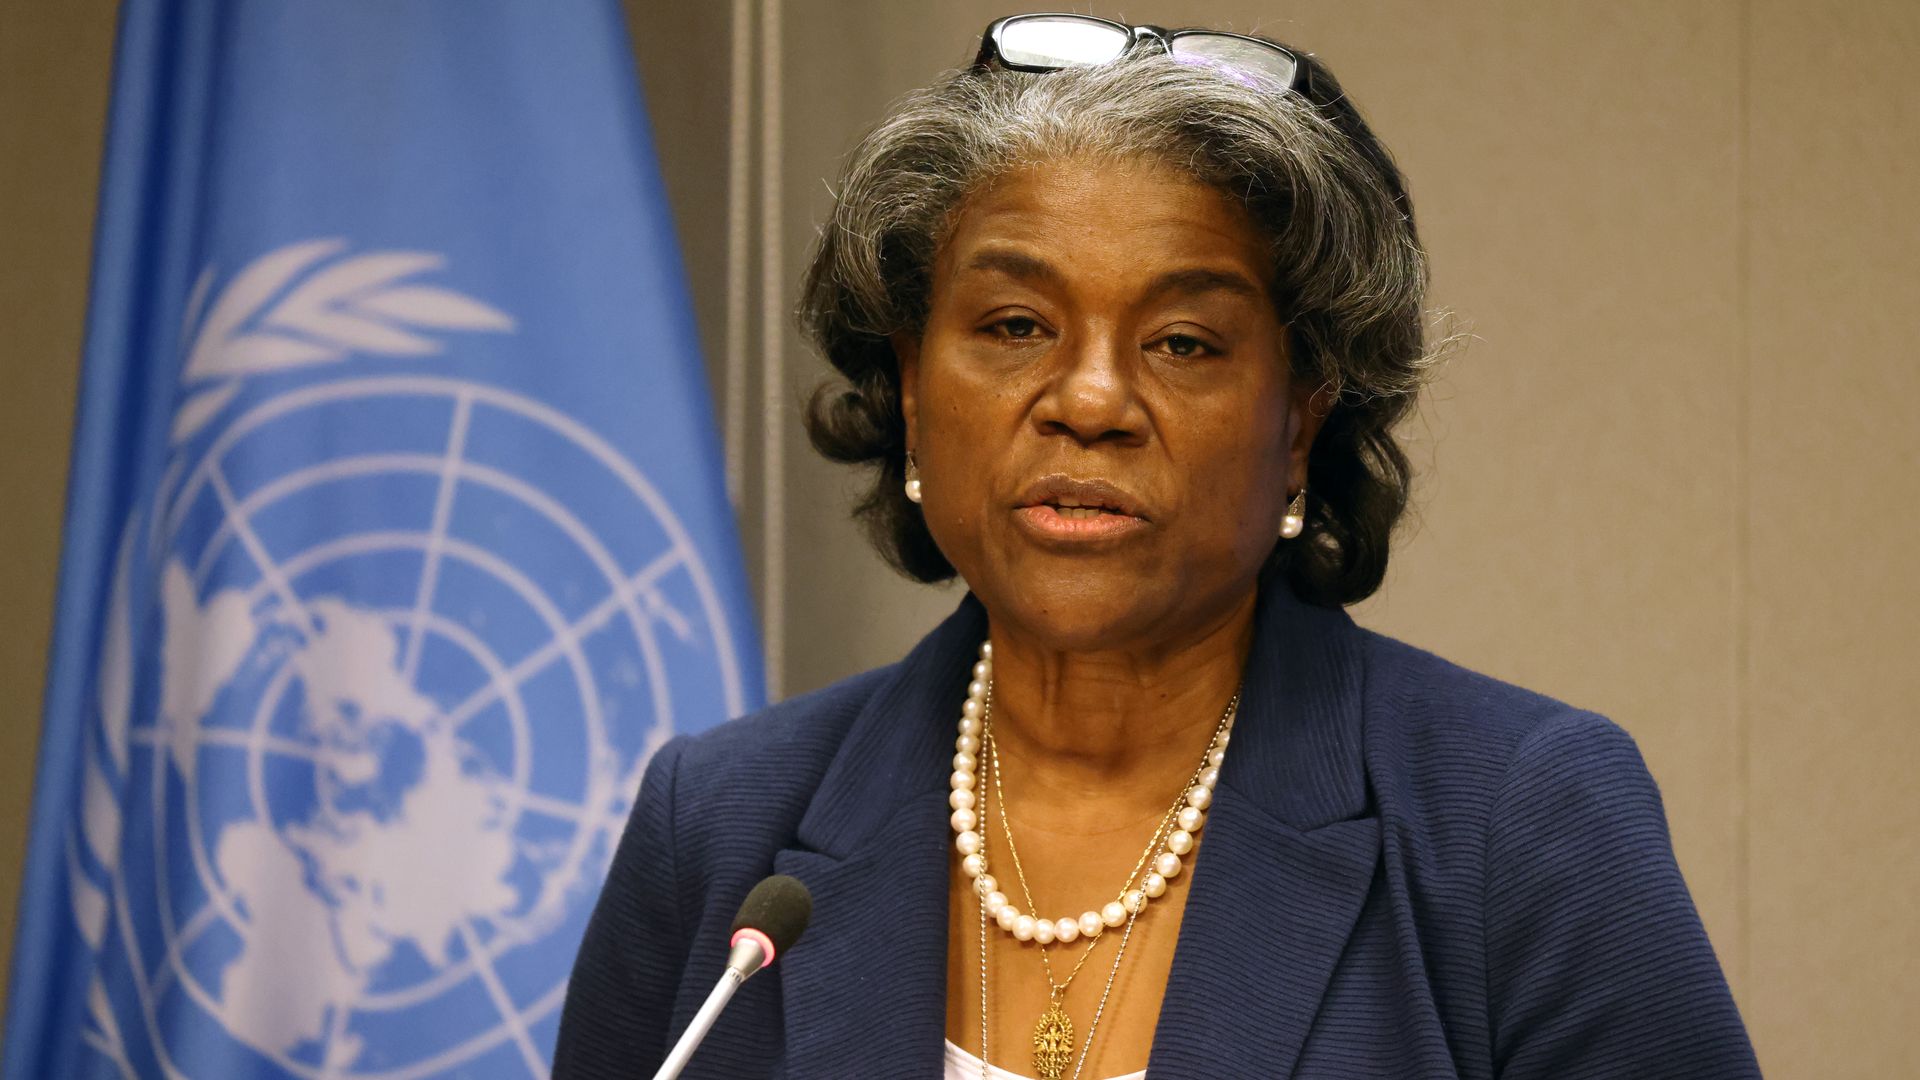 Linda Thomas-Greenfield, the new US Ambassador to the United Nations (UN), speaks to the media.